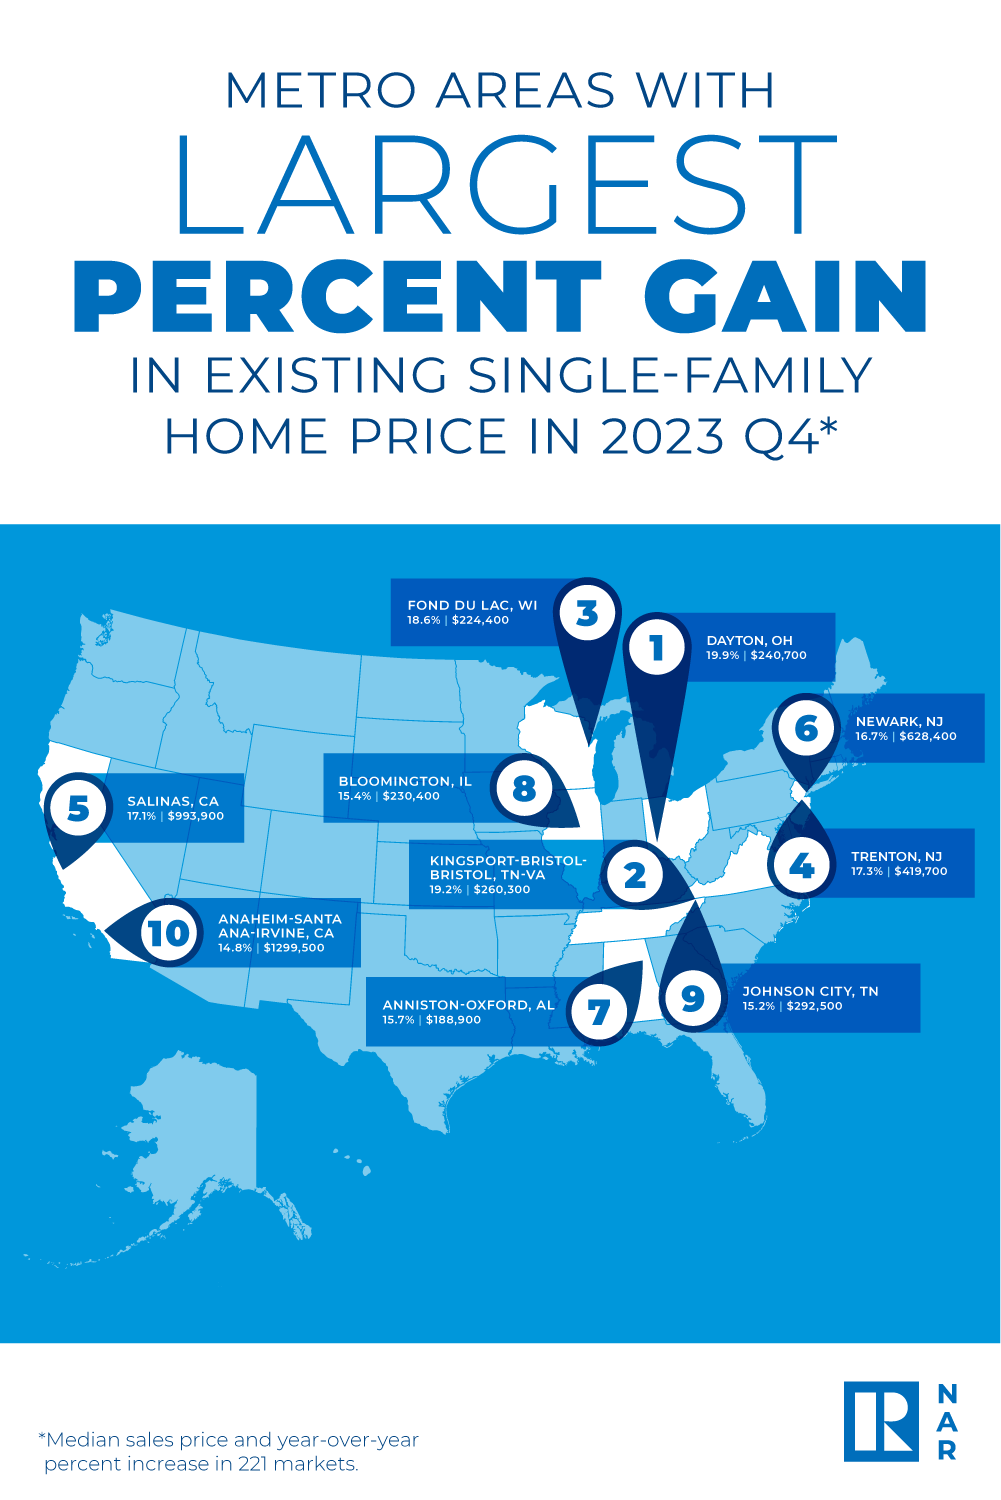 2023 Q4 Metro Areas With Largest Percent Gain in Existing Single Family Home Price